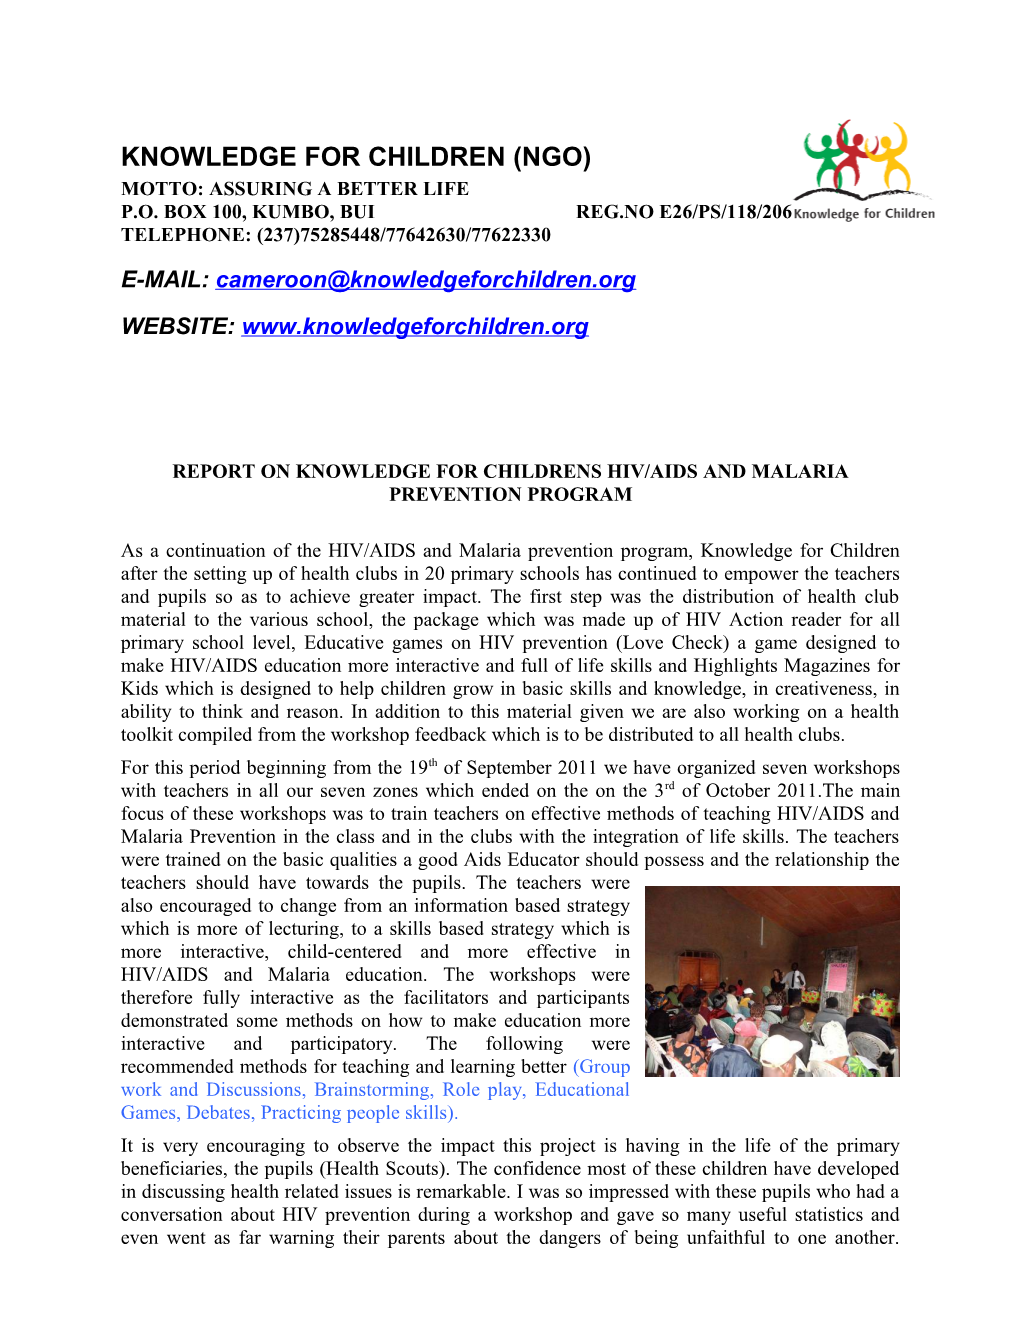 Report on Knowledge for Childrens Hiv/Aids and Malaria Prevention Program